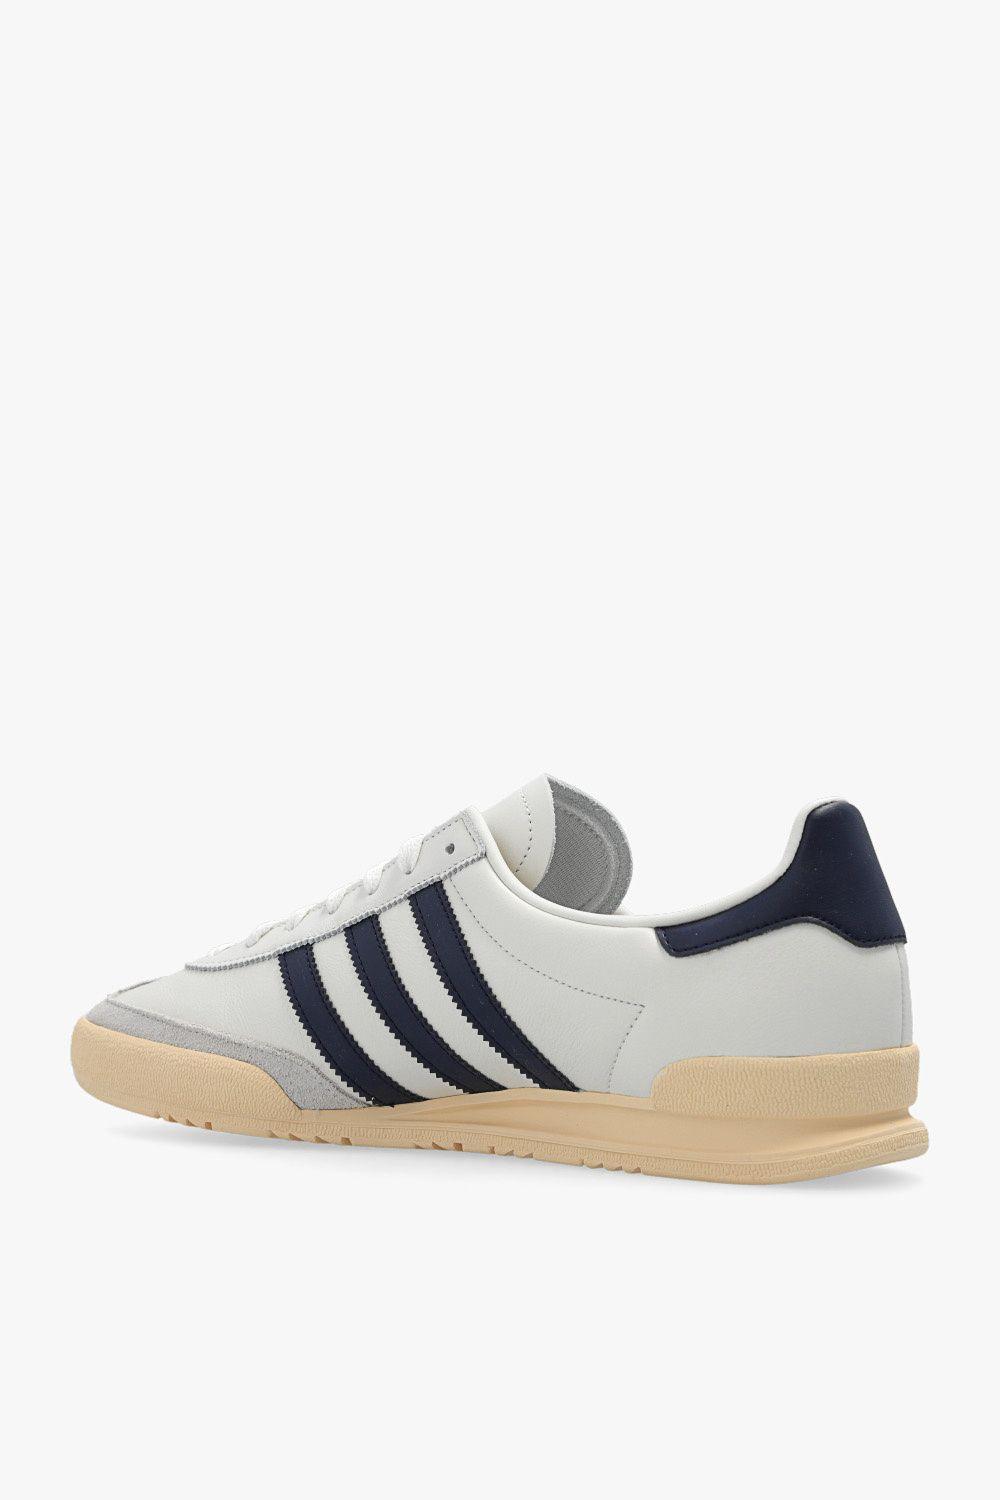 adidas Originals 'jeans' Sneakers in White | Lyst